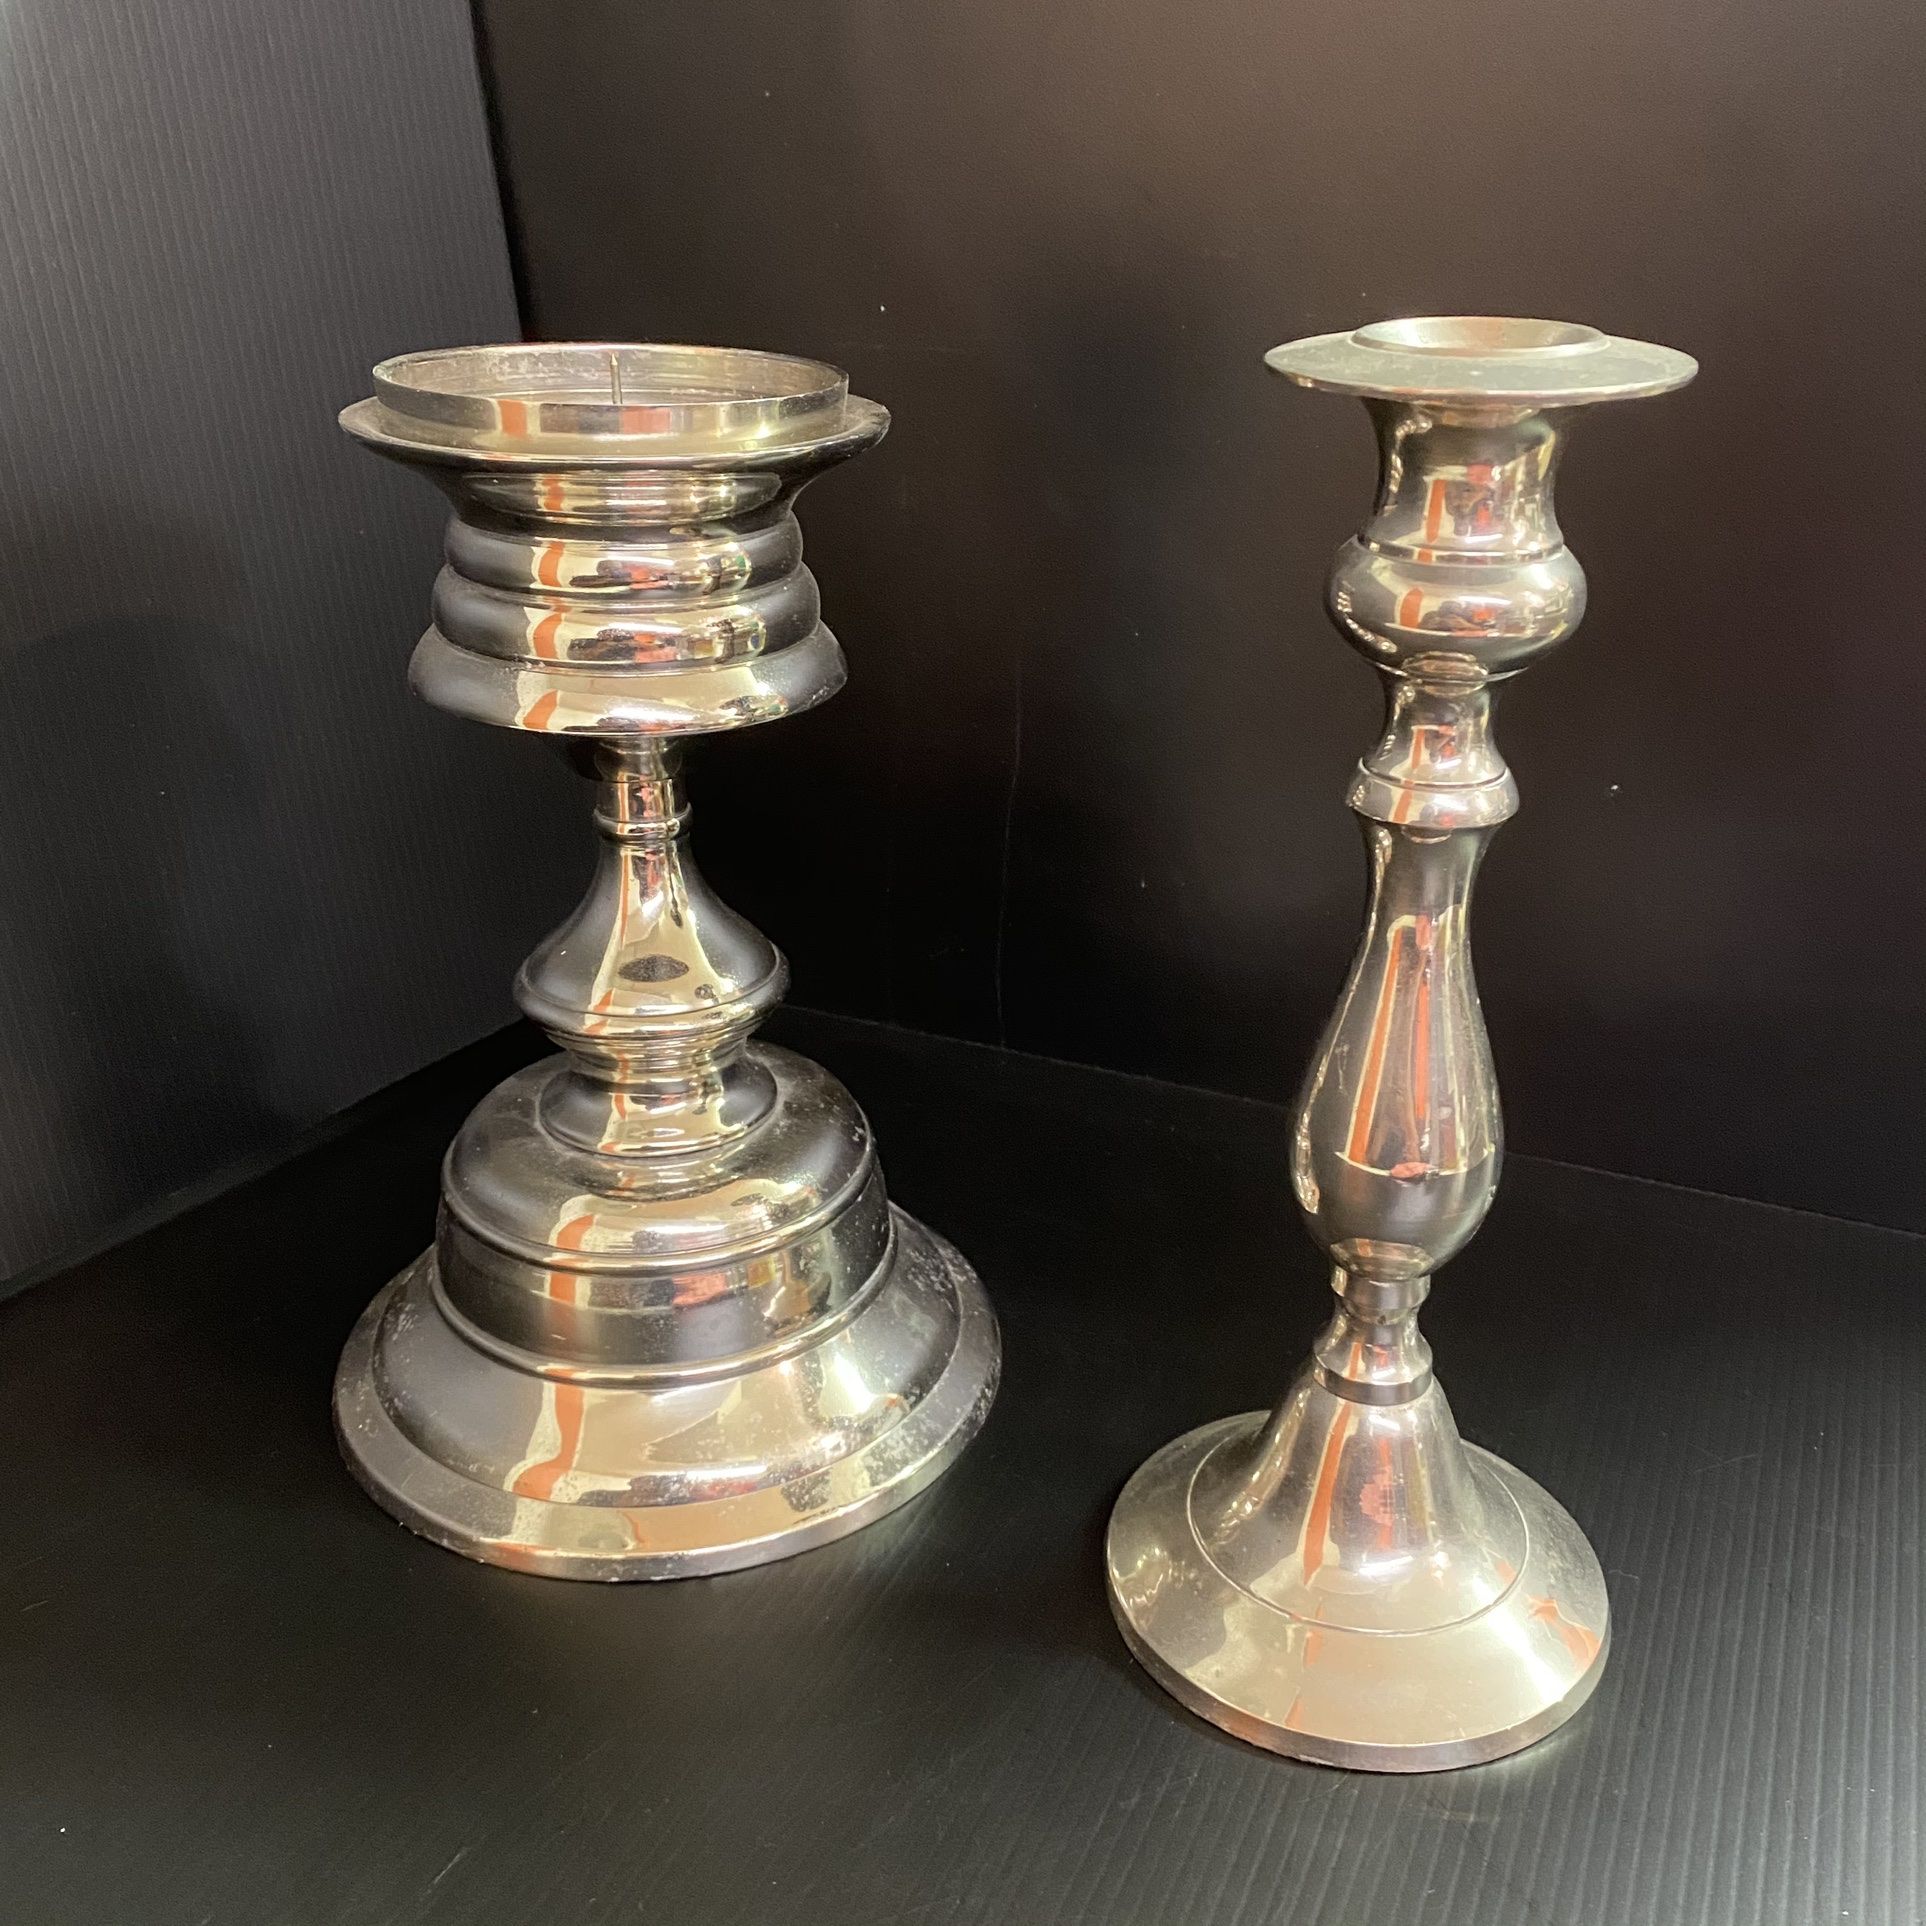 (2) Chrome Candle Holders - Metal